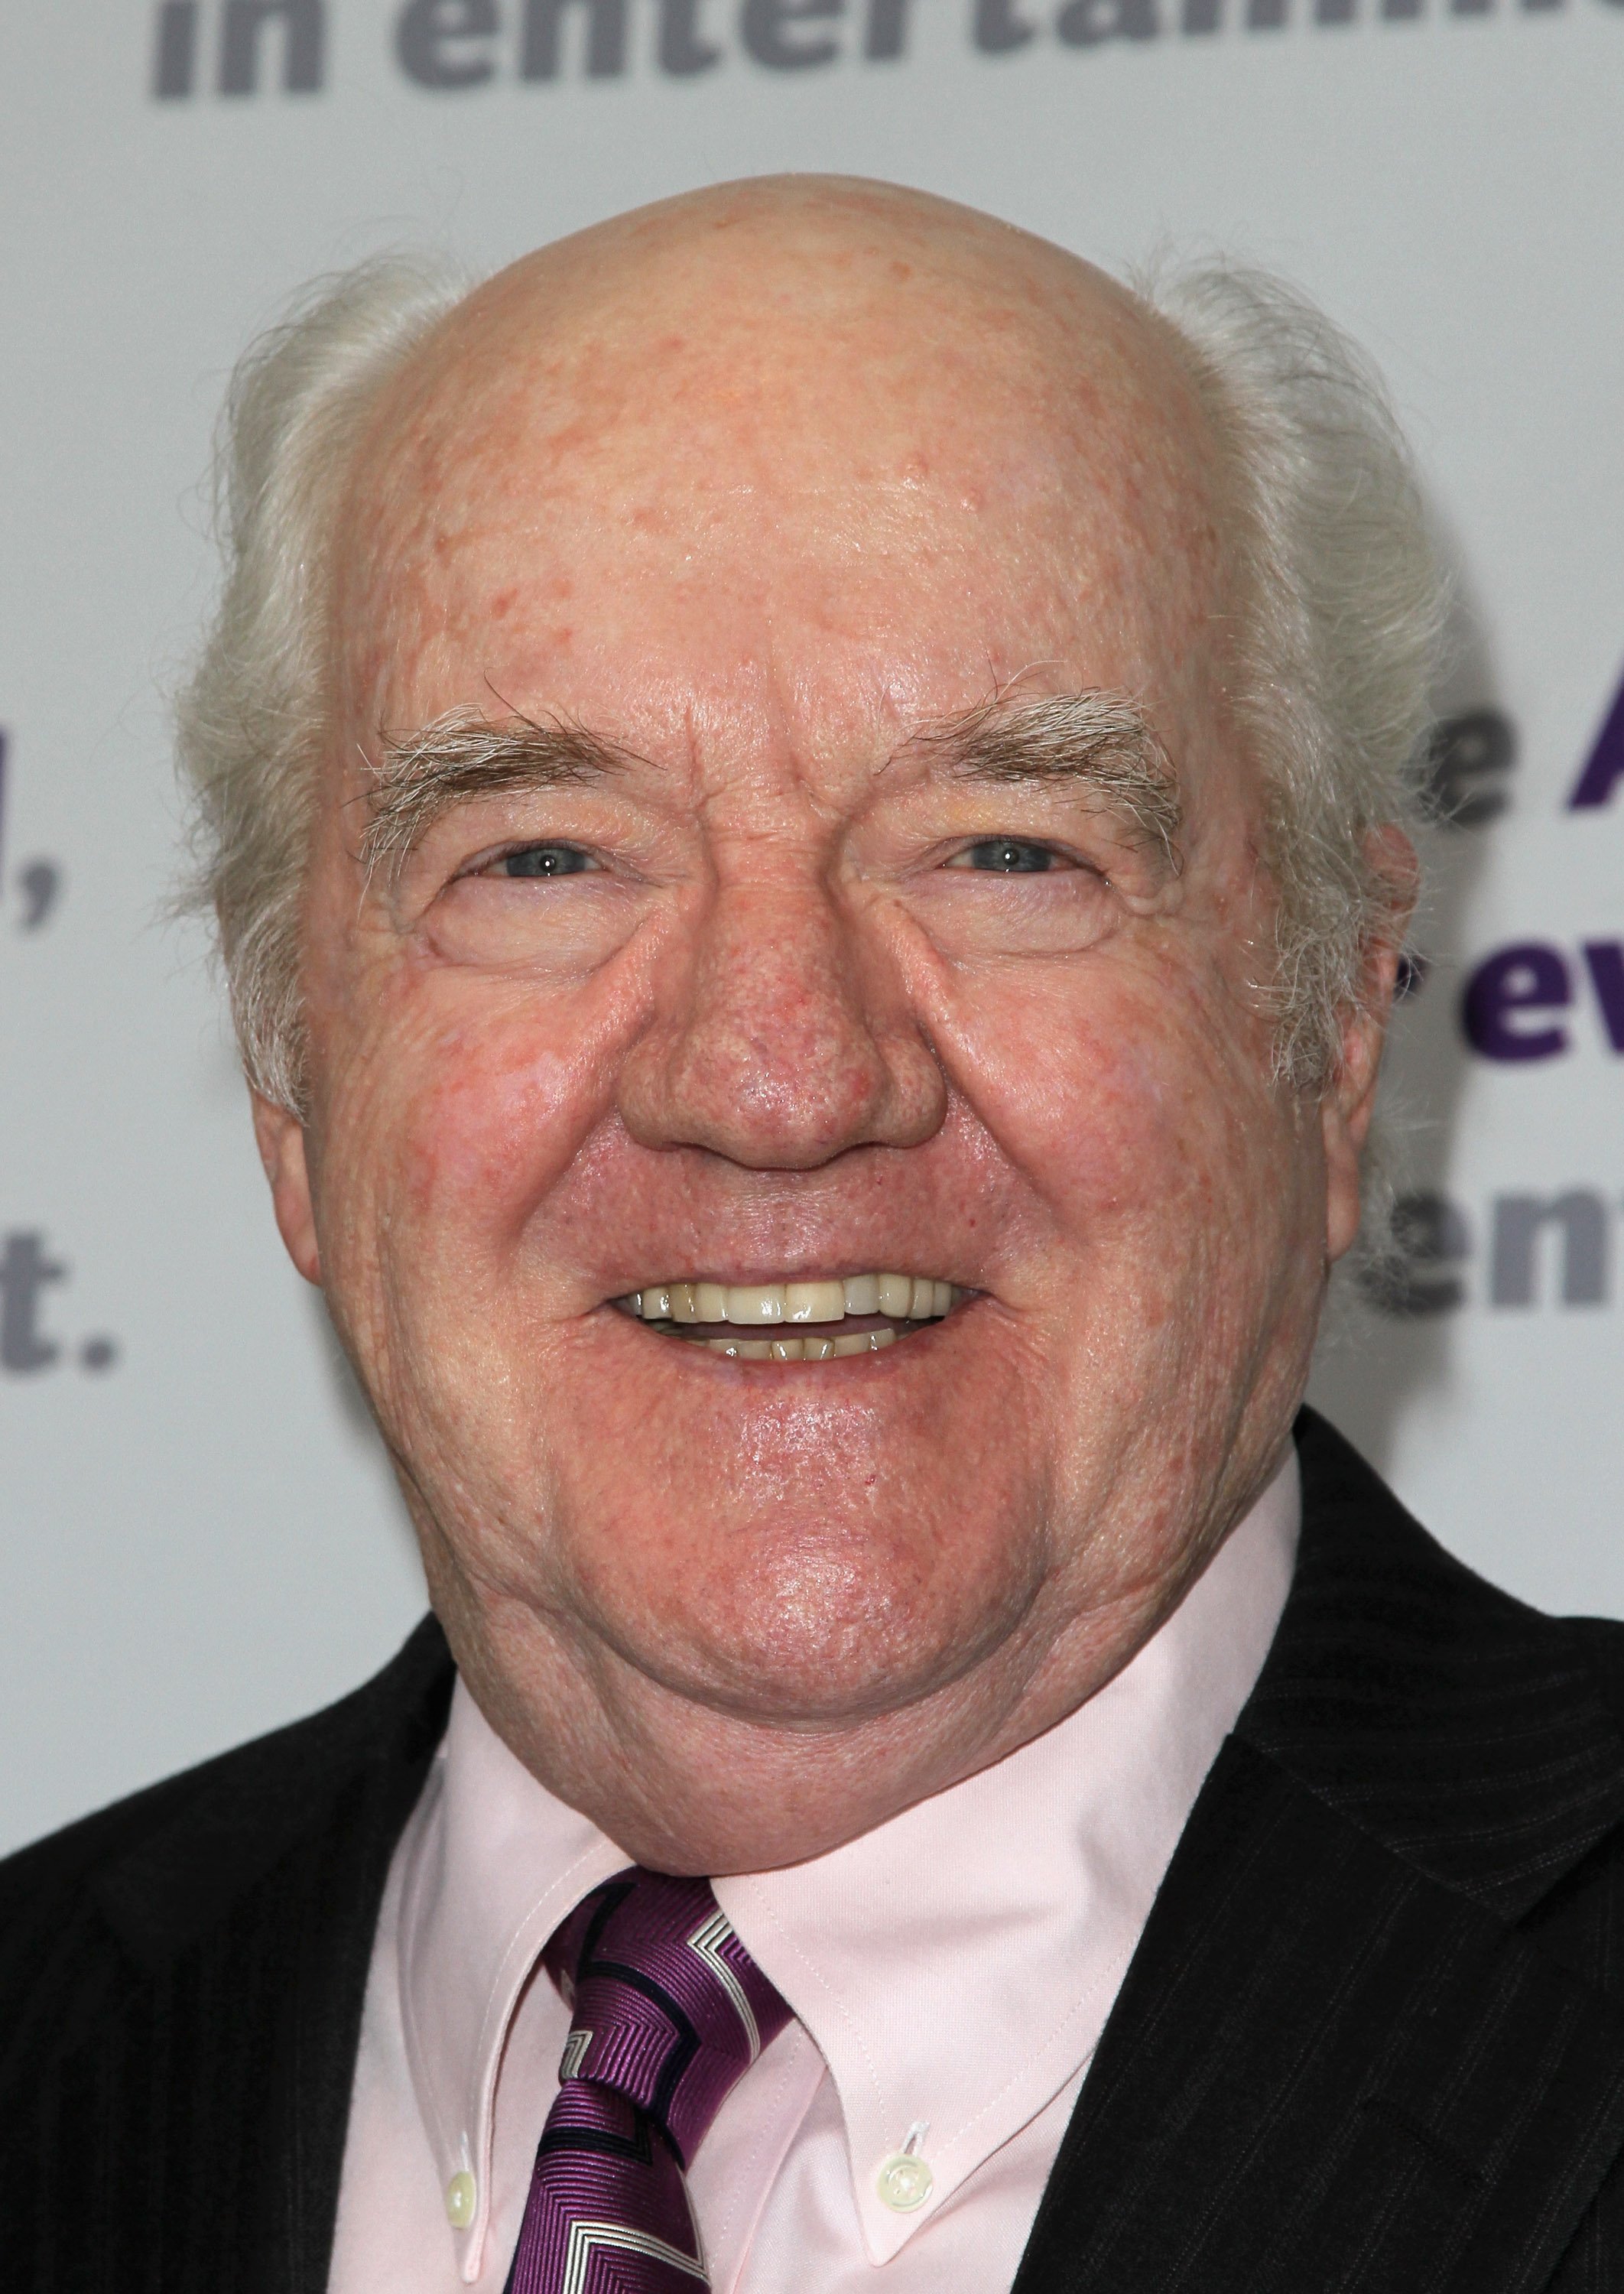 Richard Herd arrives at The Actors Fund's 15th Annual Tony Awards Party on June 12, 2011, in Los Angeles, California. | Source: Getty Images.